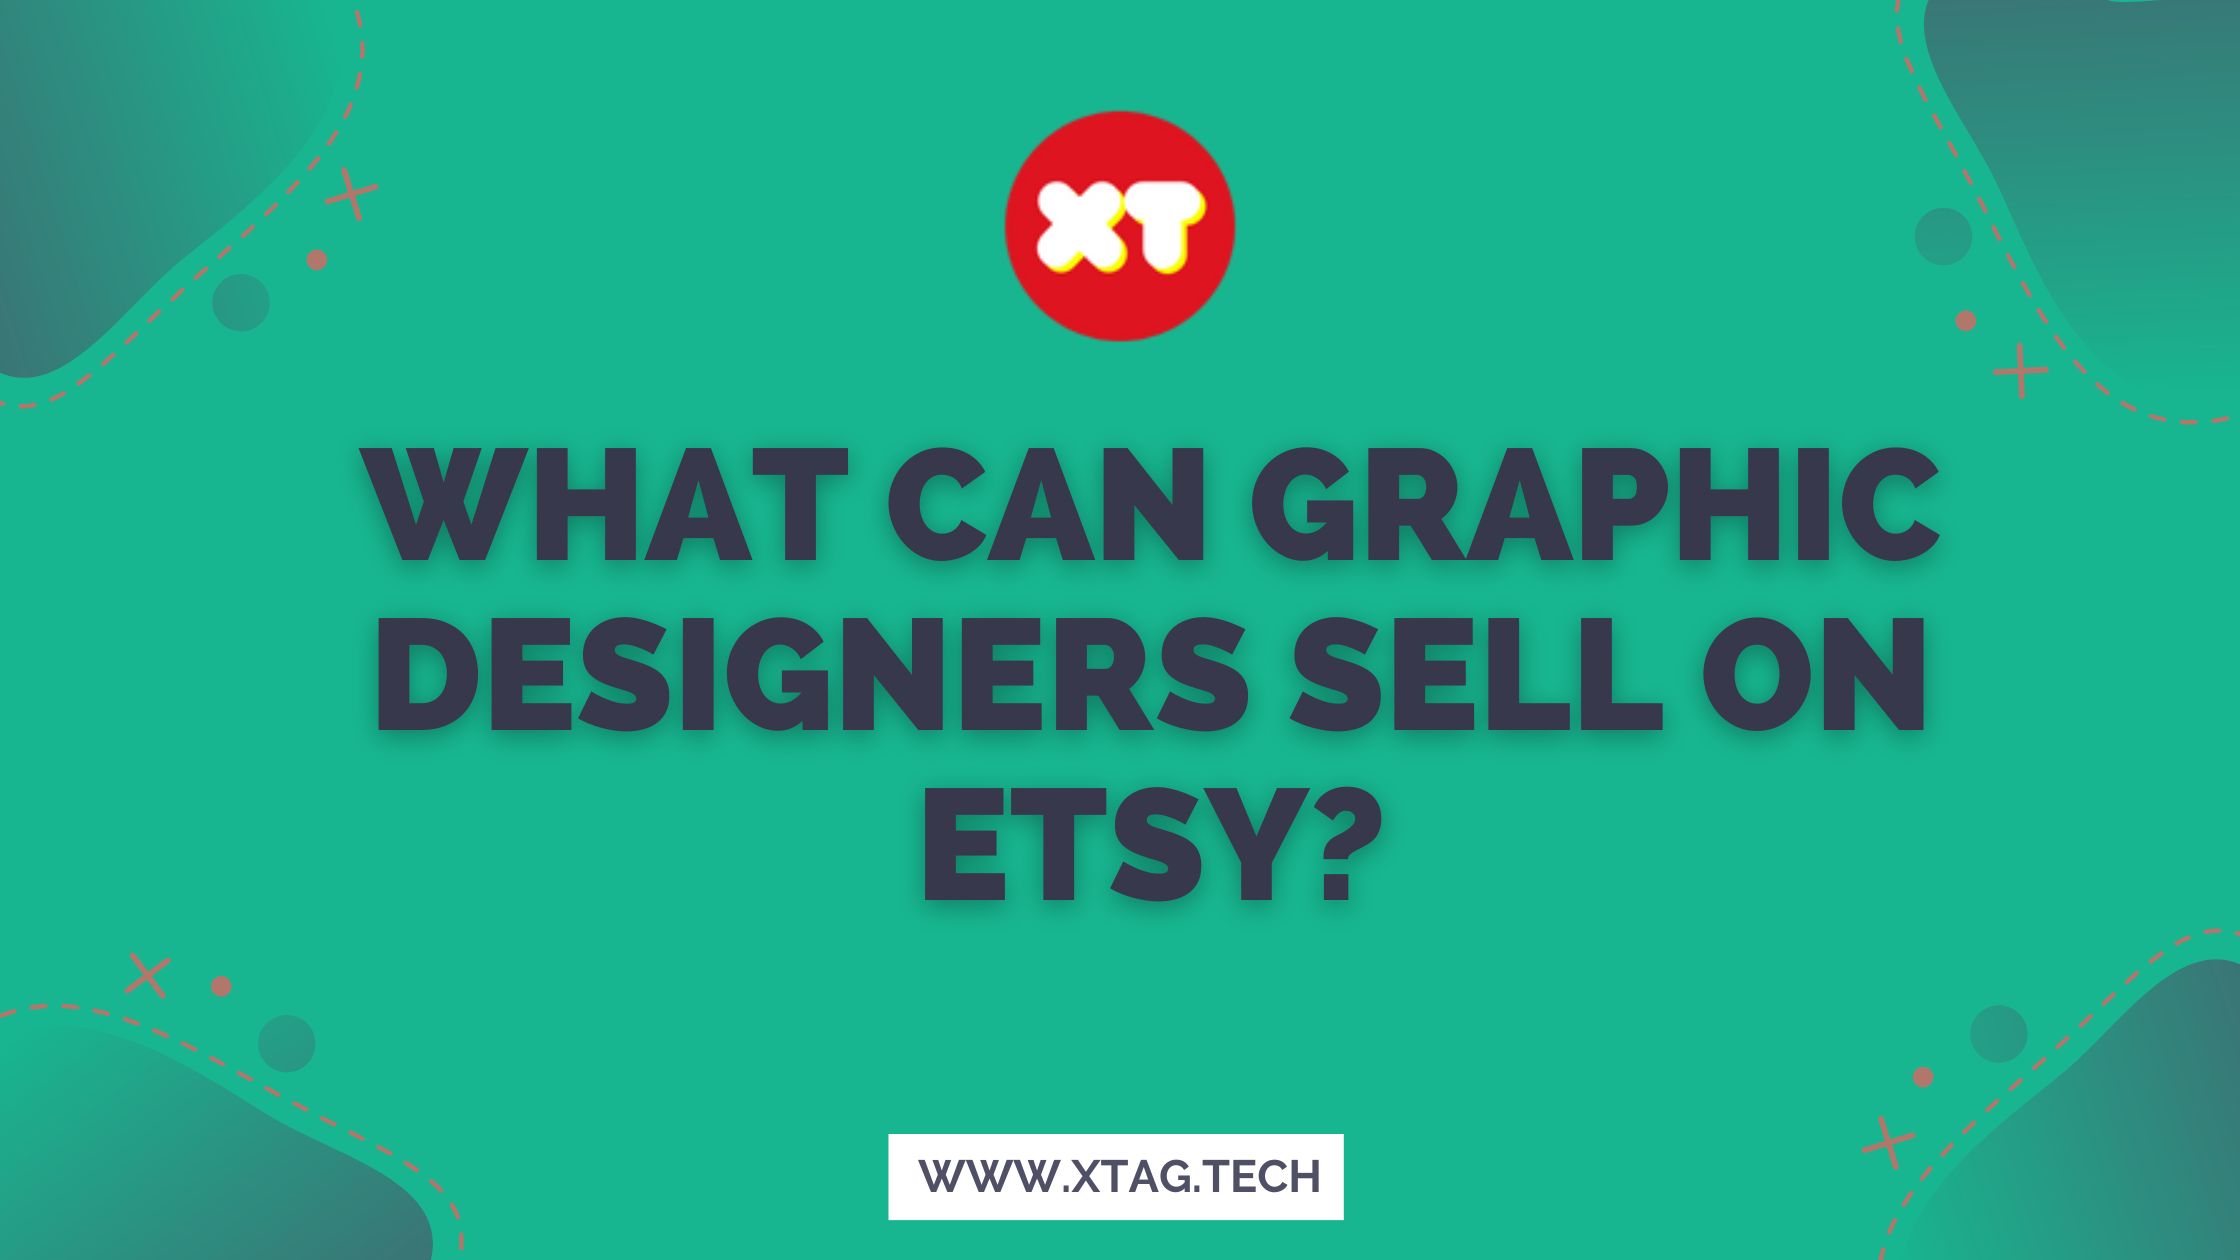 What Can Graphic Designers Sell On Etsy?